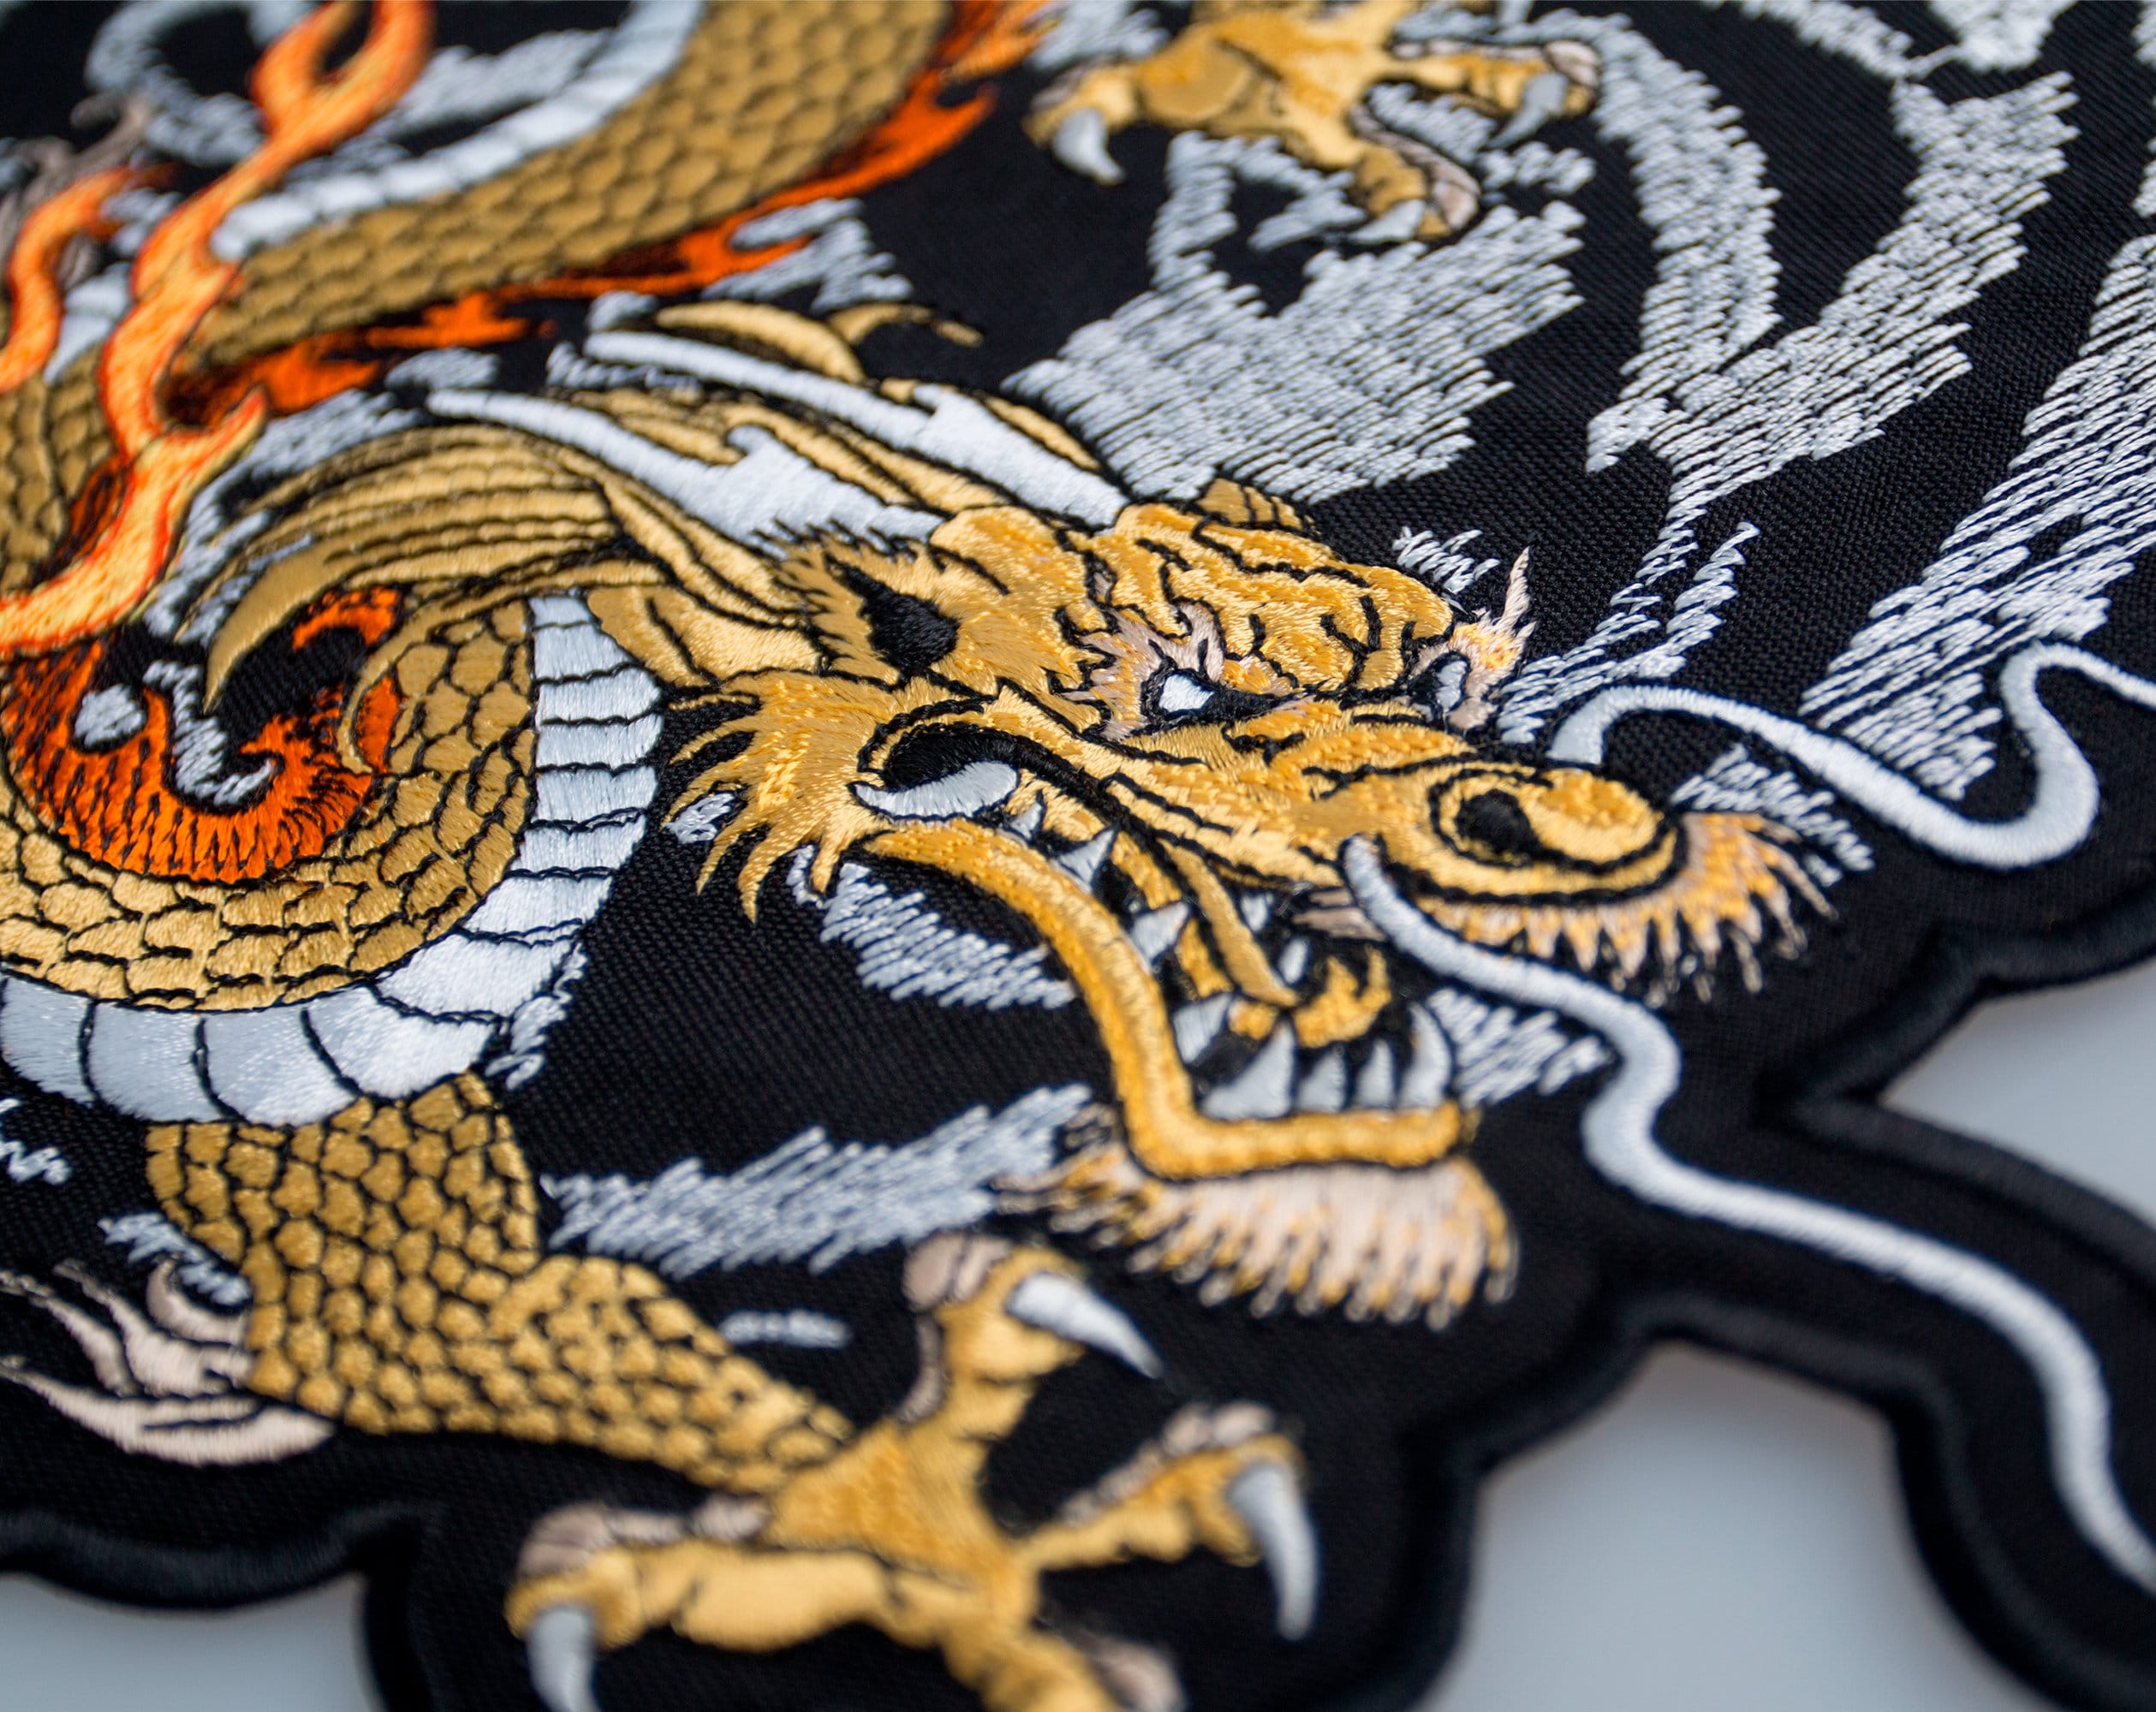 Large Back Patch Embroidered Dragon Phoenix Fire Bird Japanese Jacket Iron  On